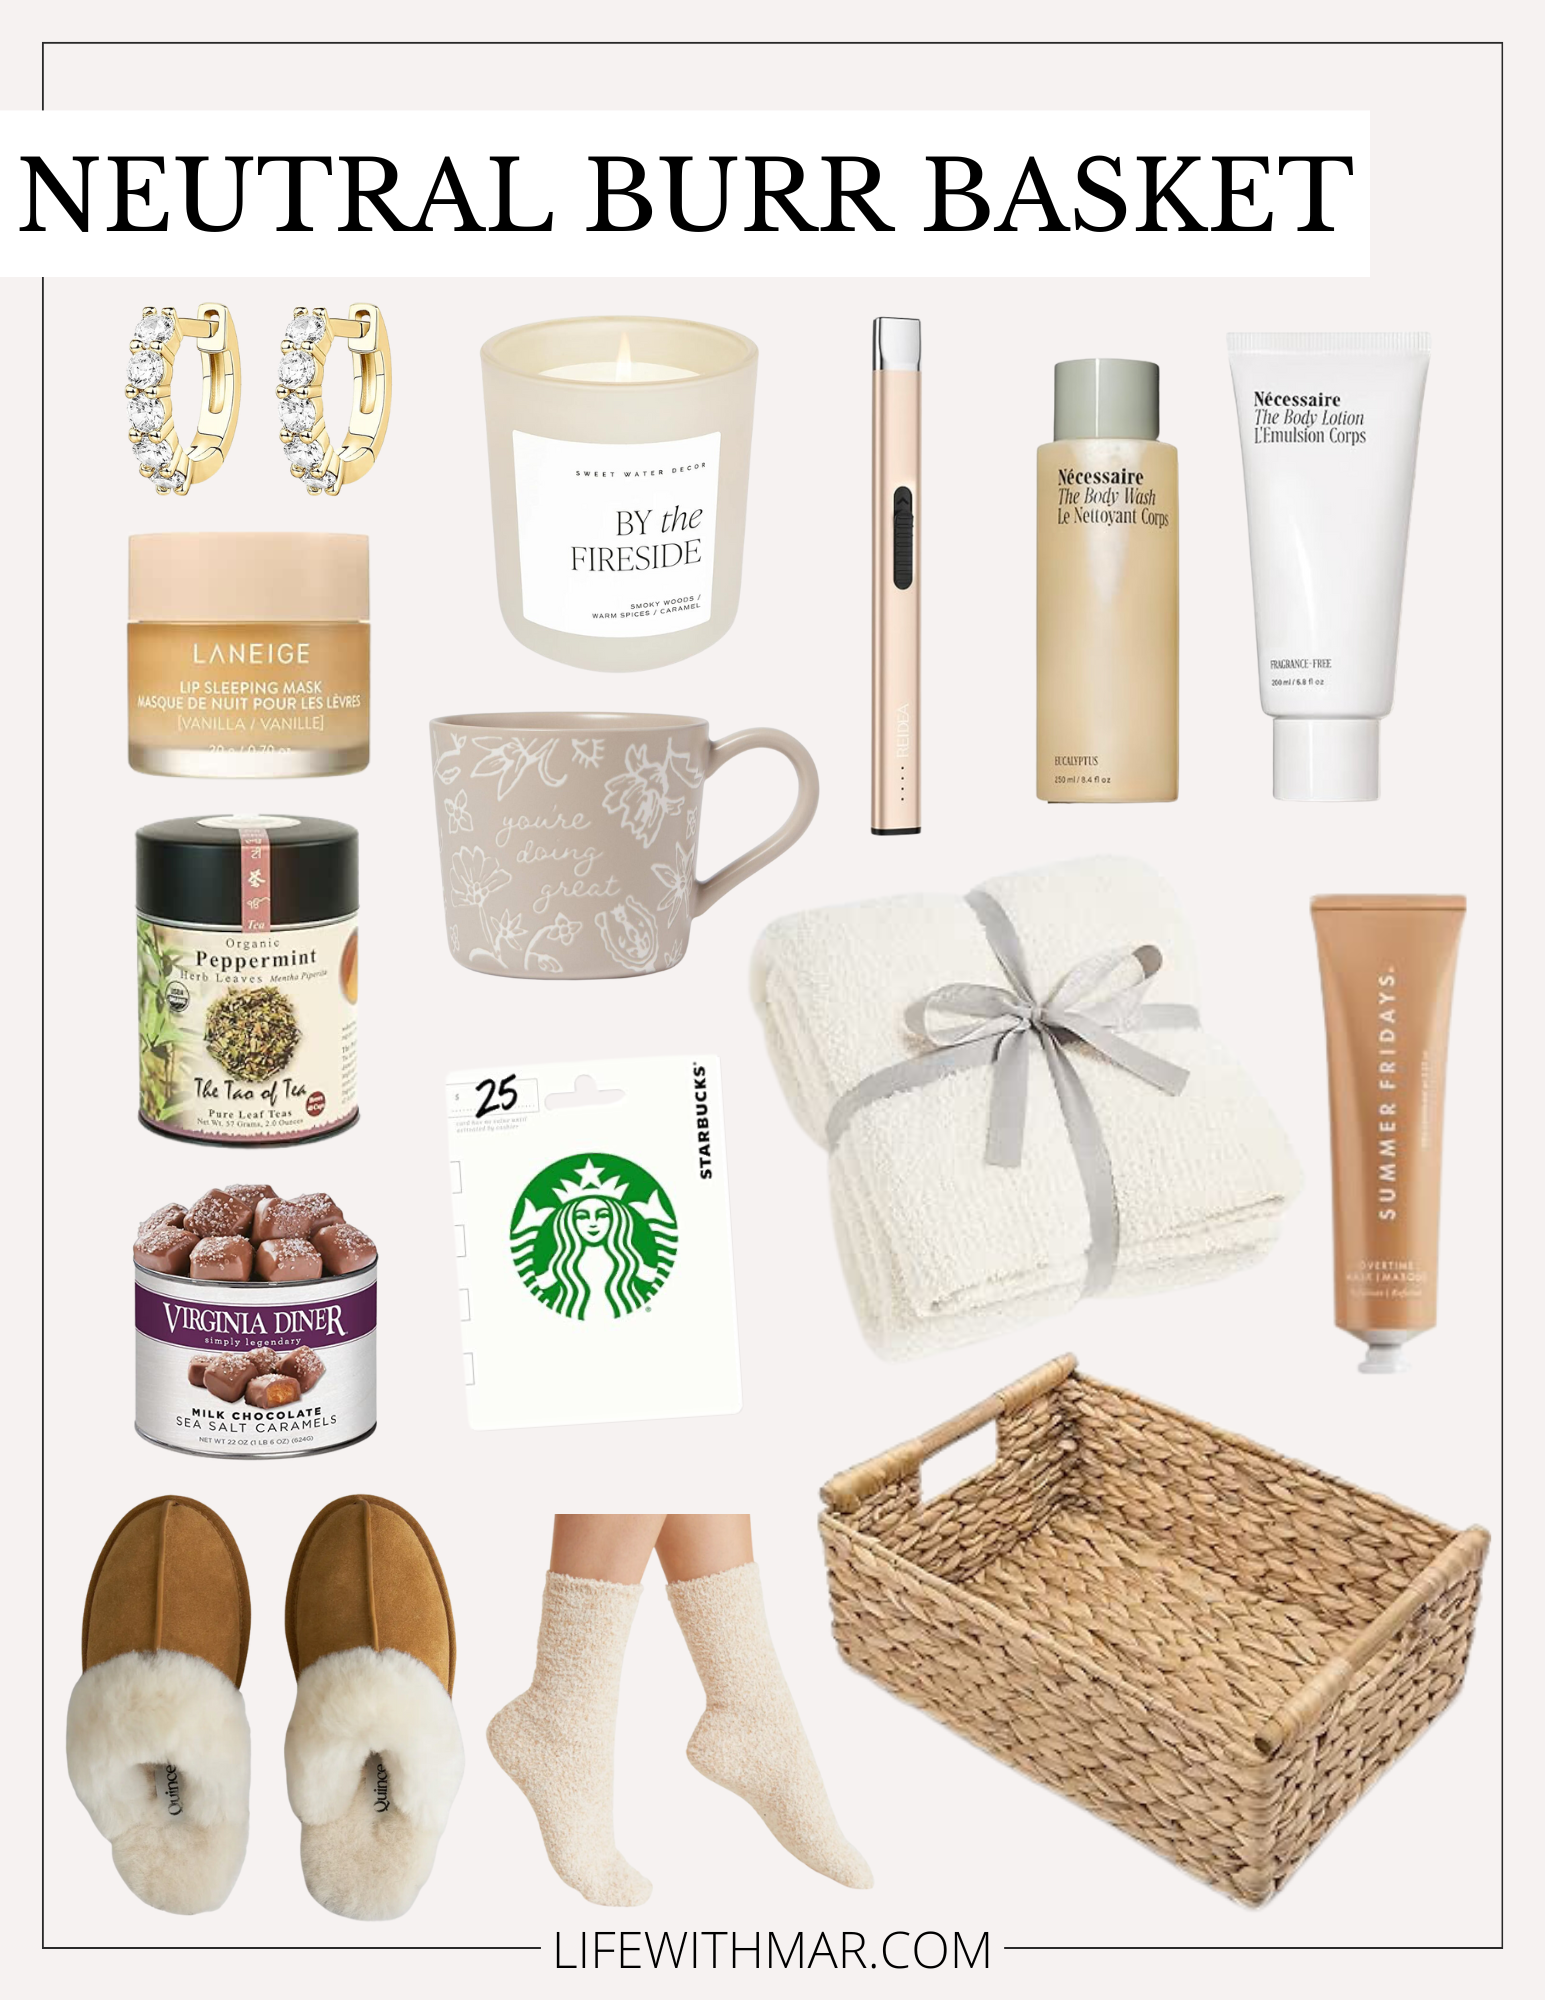 Cuddle Up With These Cute and Cozy Burr Basket Gift Ideas